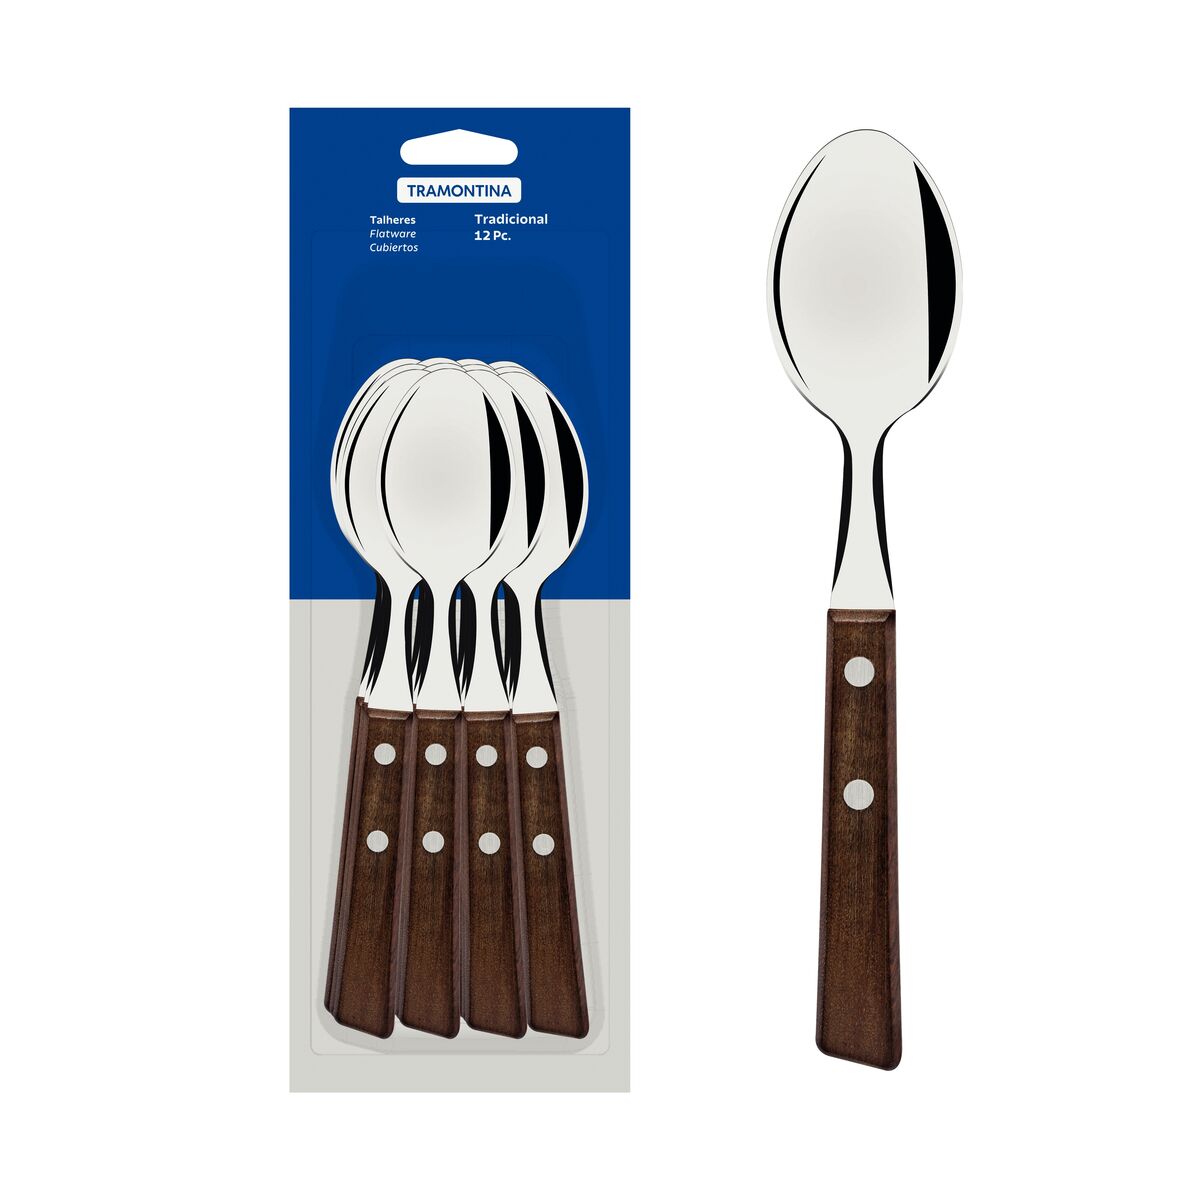 Tramontina Tradicional 12-Piece Set of Table Spoons with Stainless